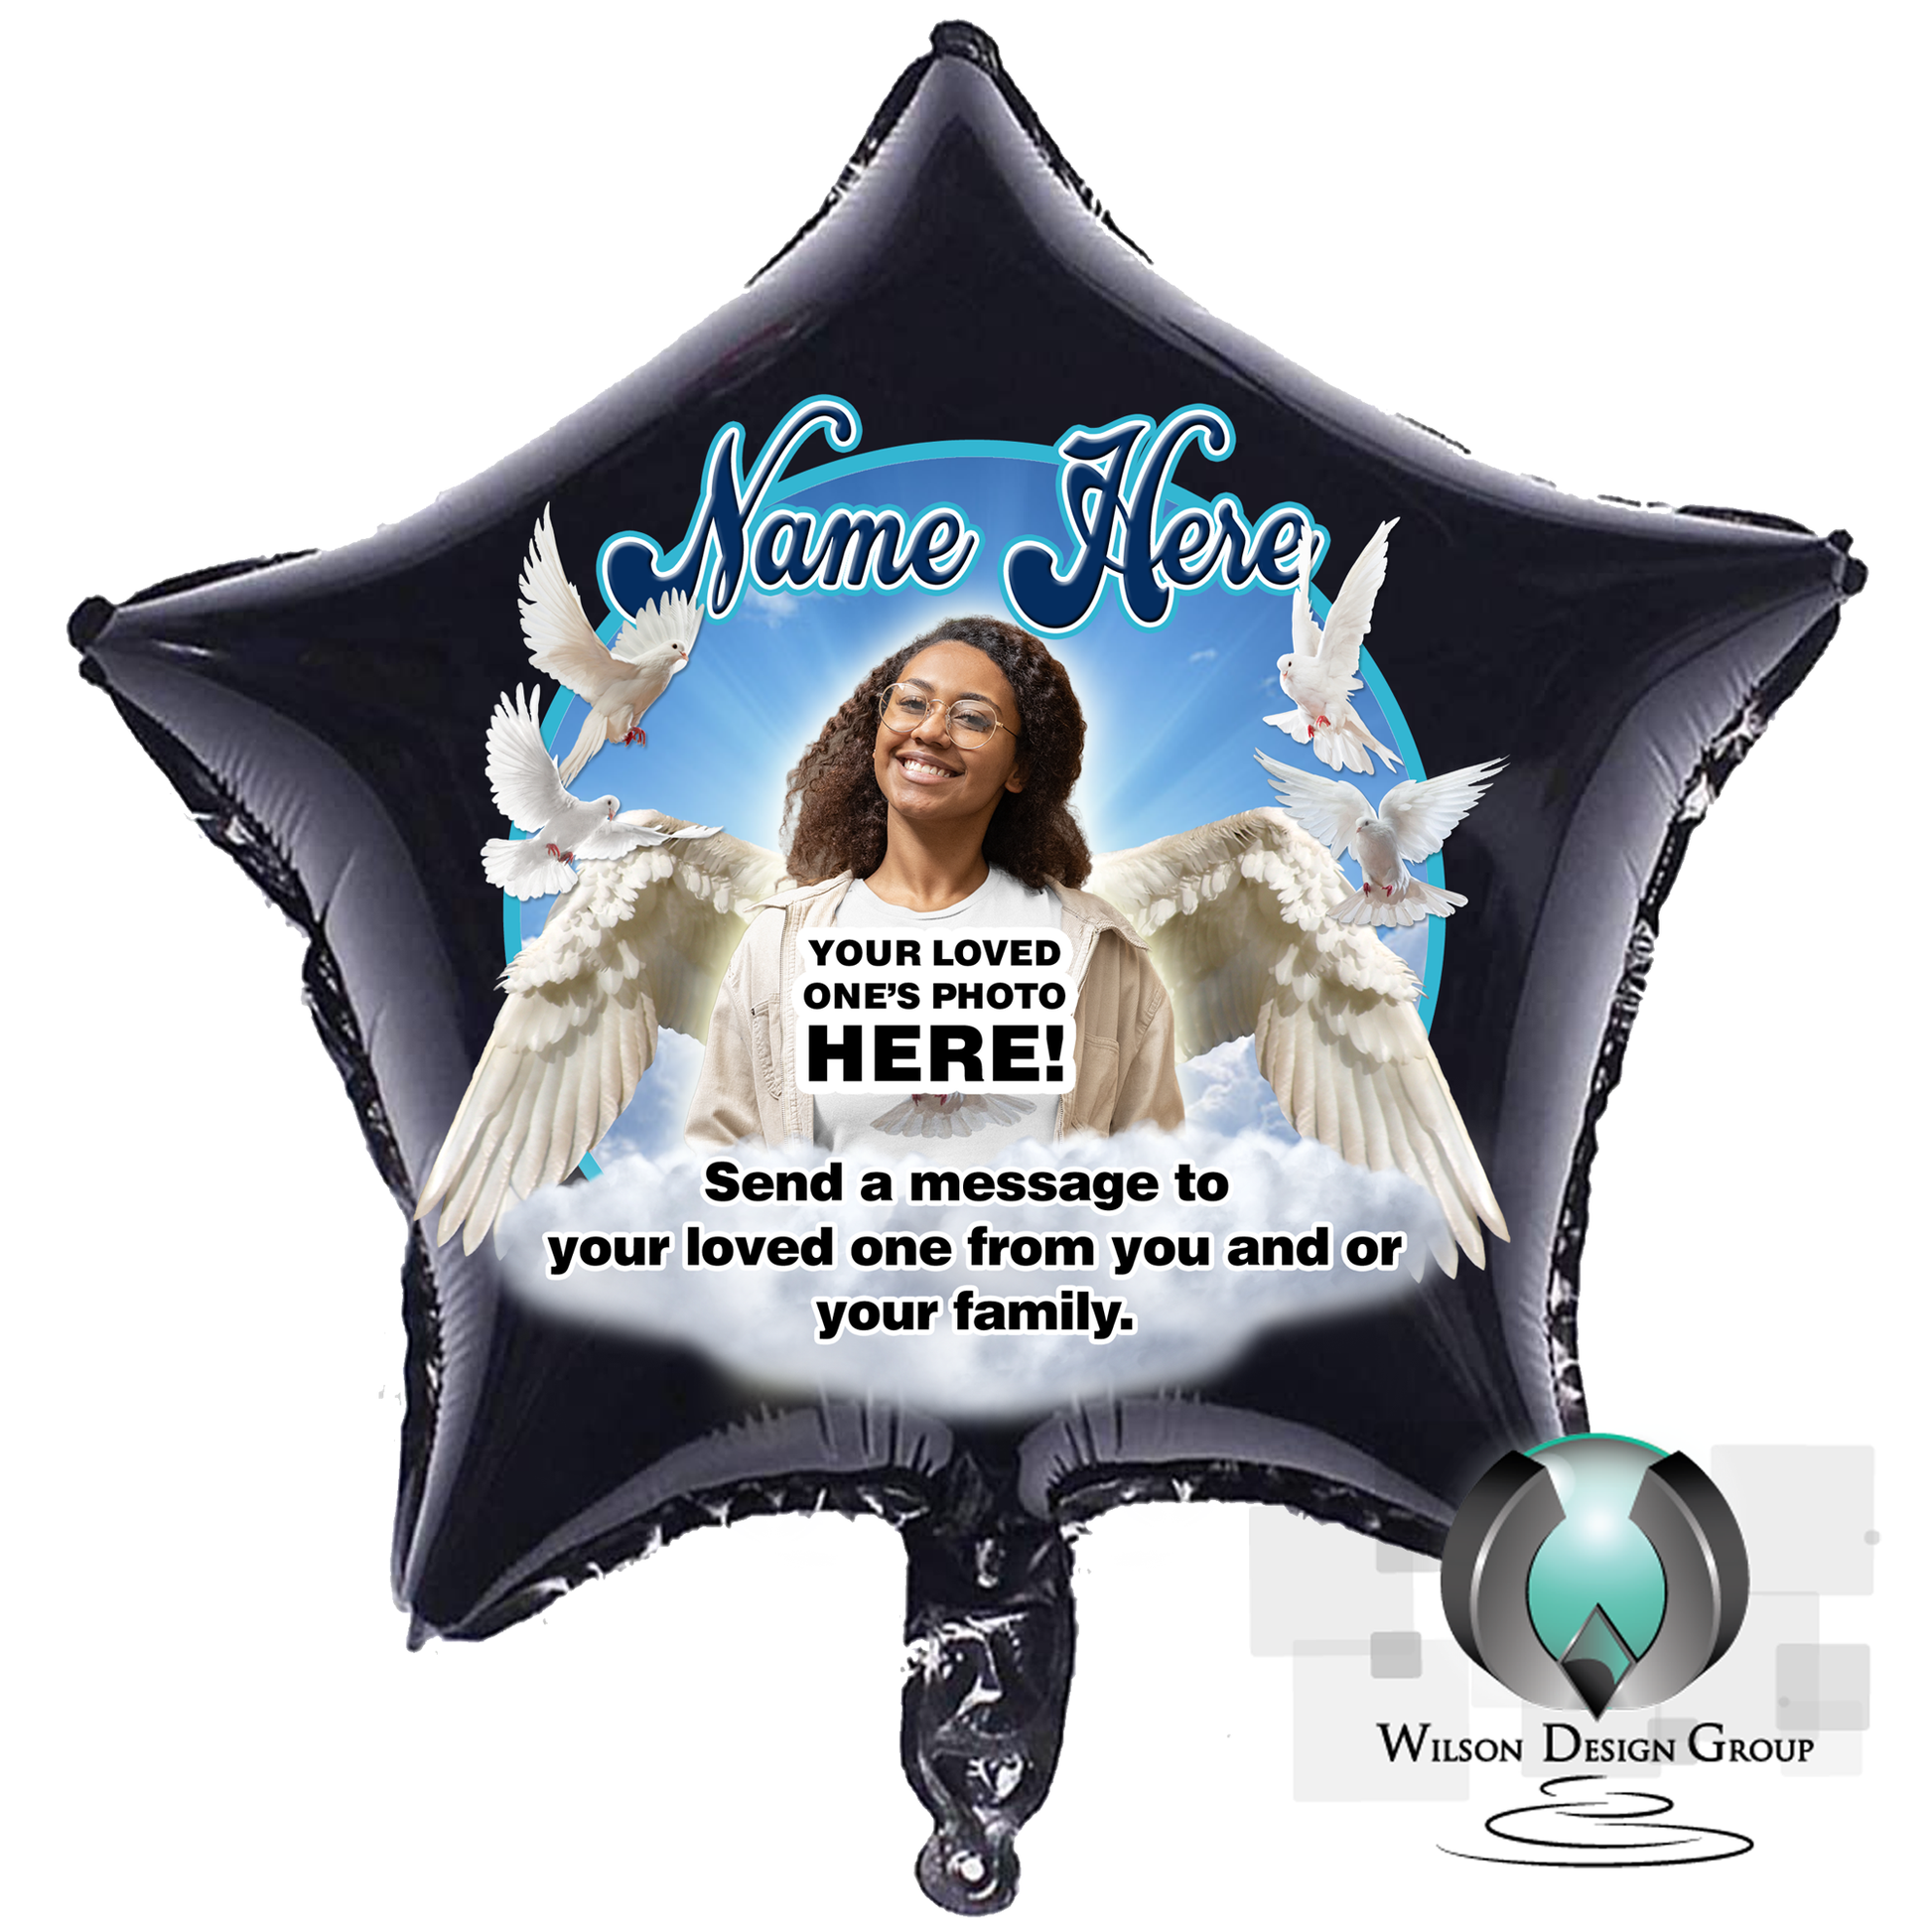 Personalized Balloon Release Message Memorial Balloons with Photo - Wilson Design Group